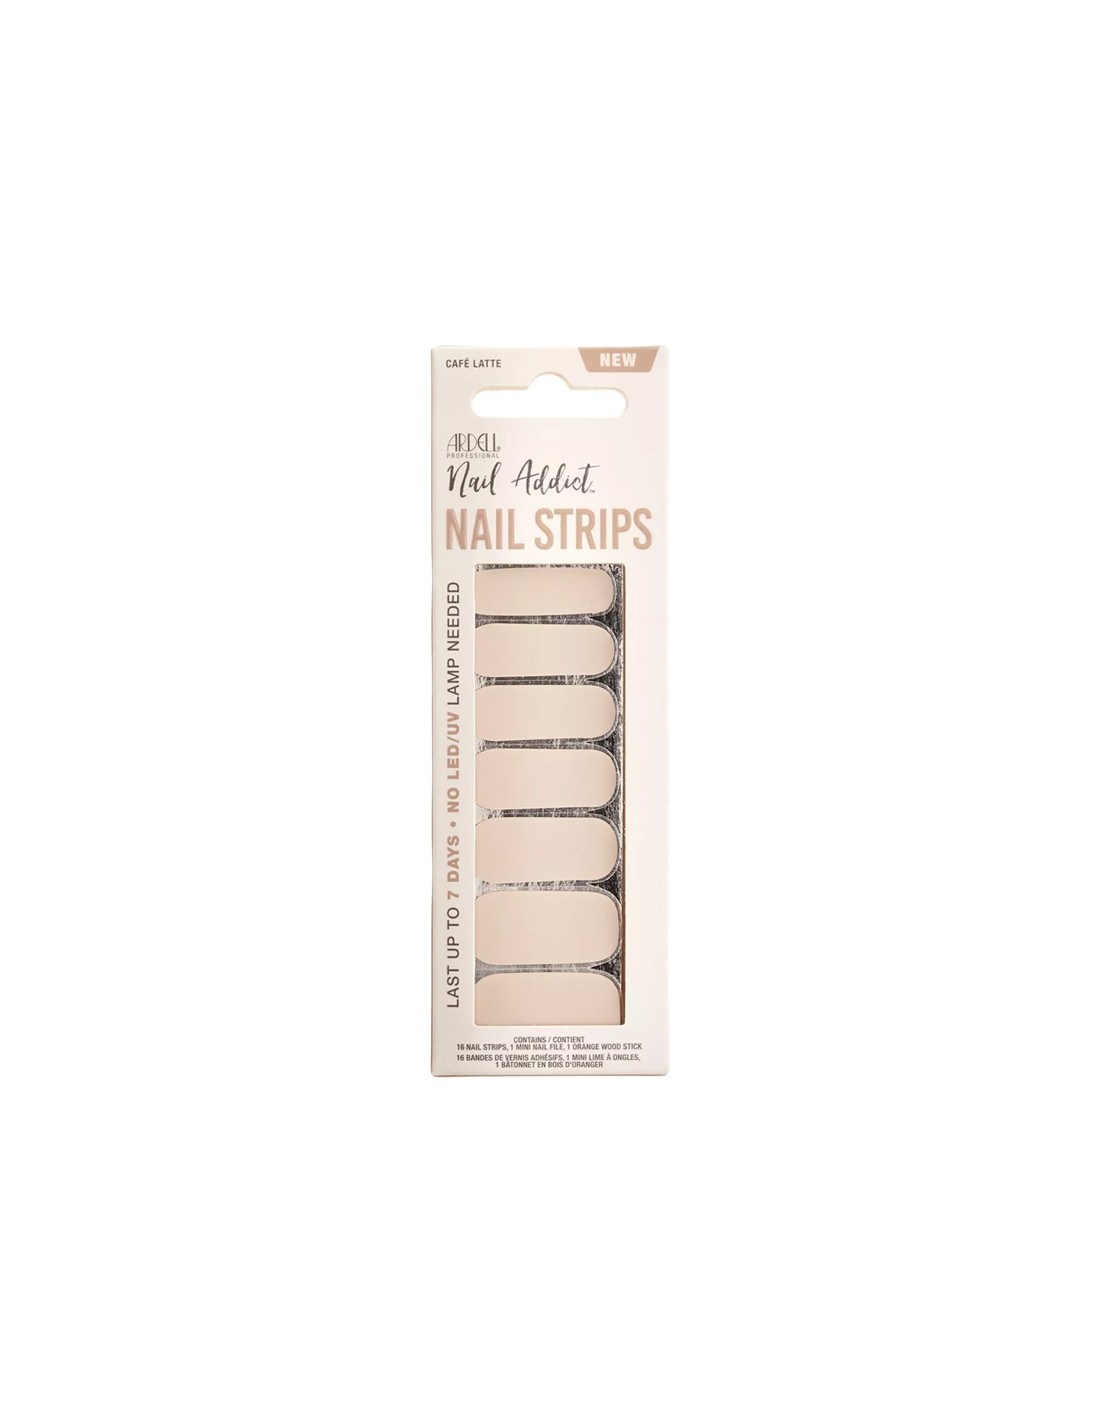 Ardell Nail Addict Nail Strips Cafe Latte